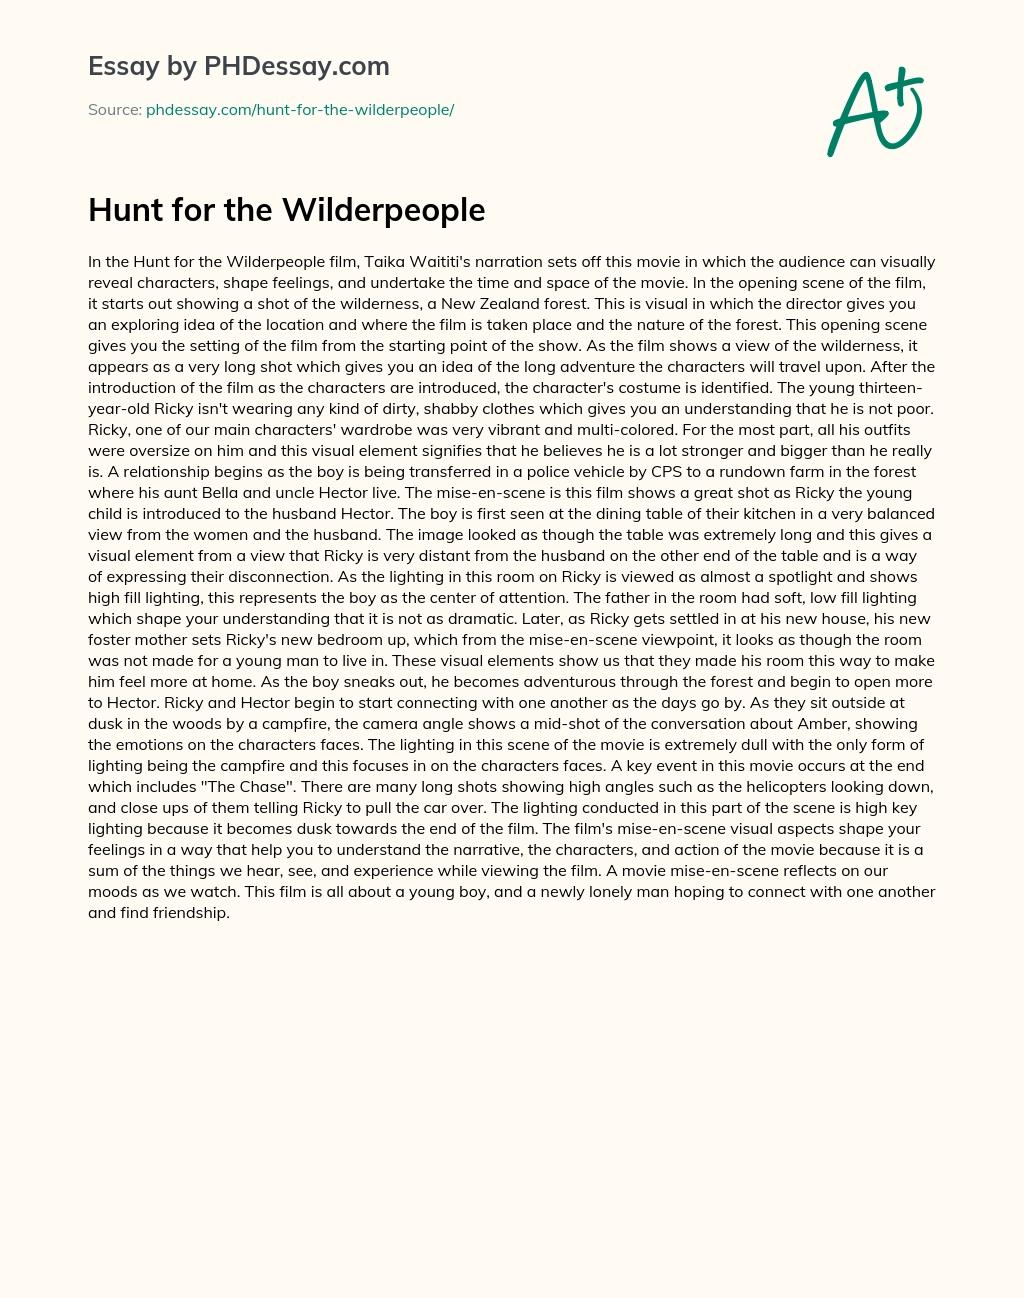 Hunt for the Wilderpeople essay